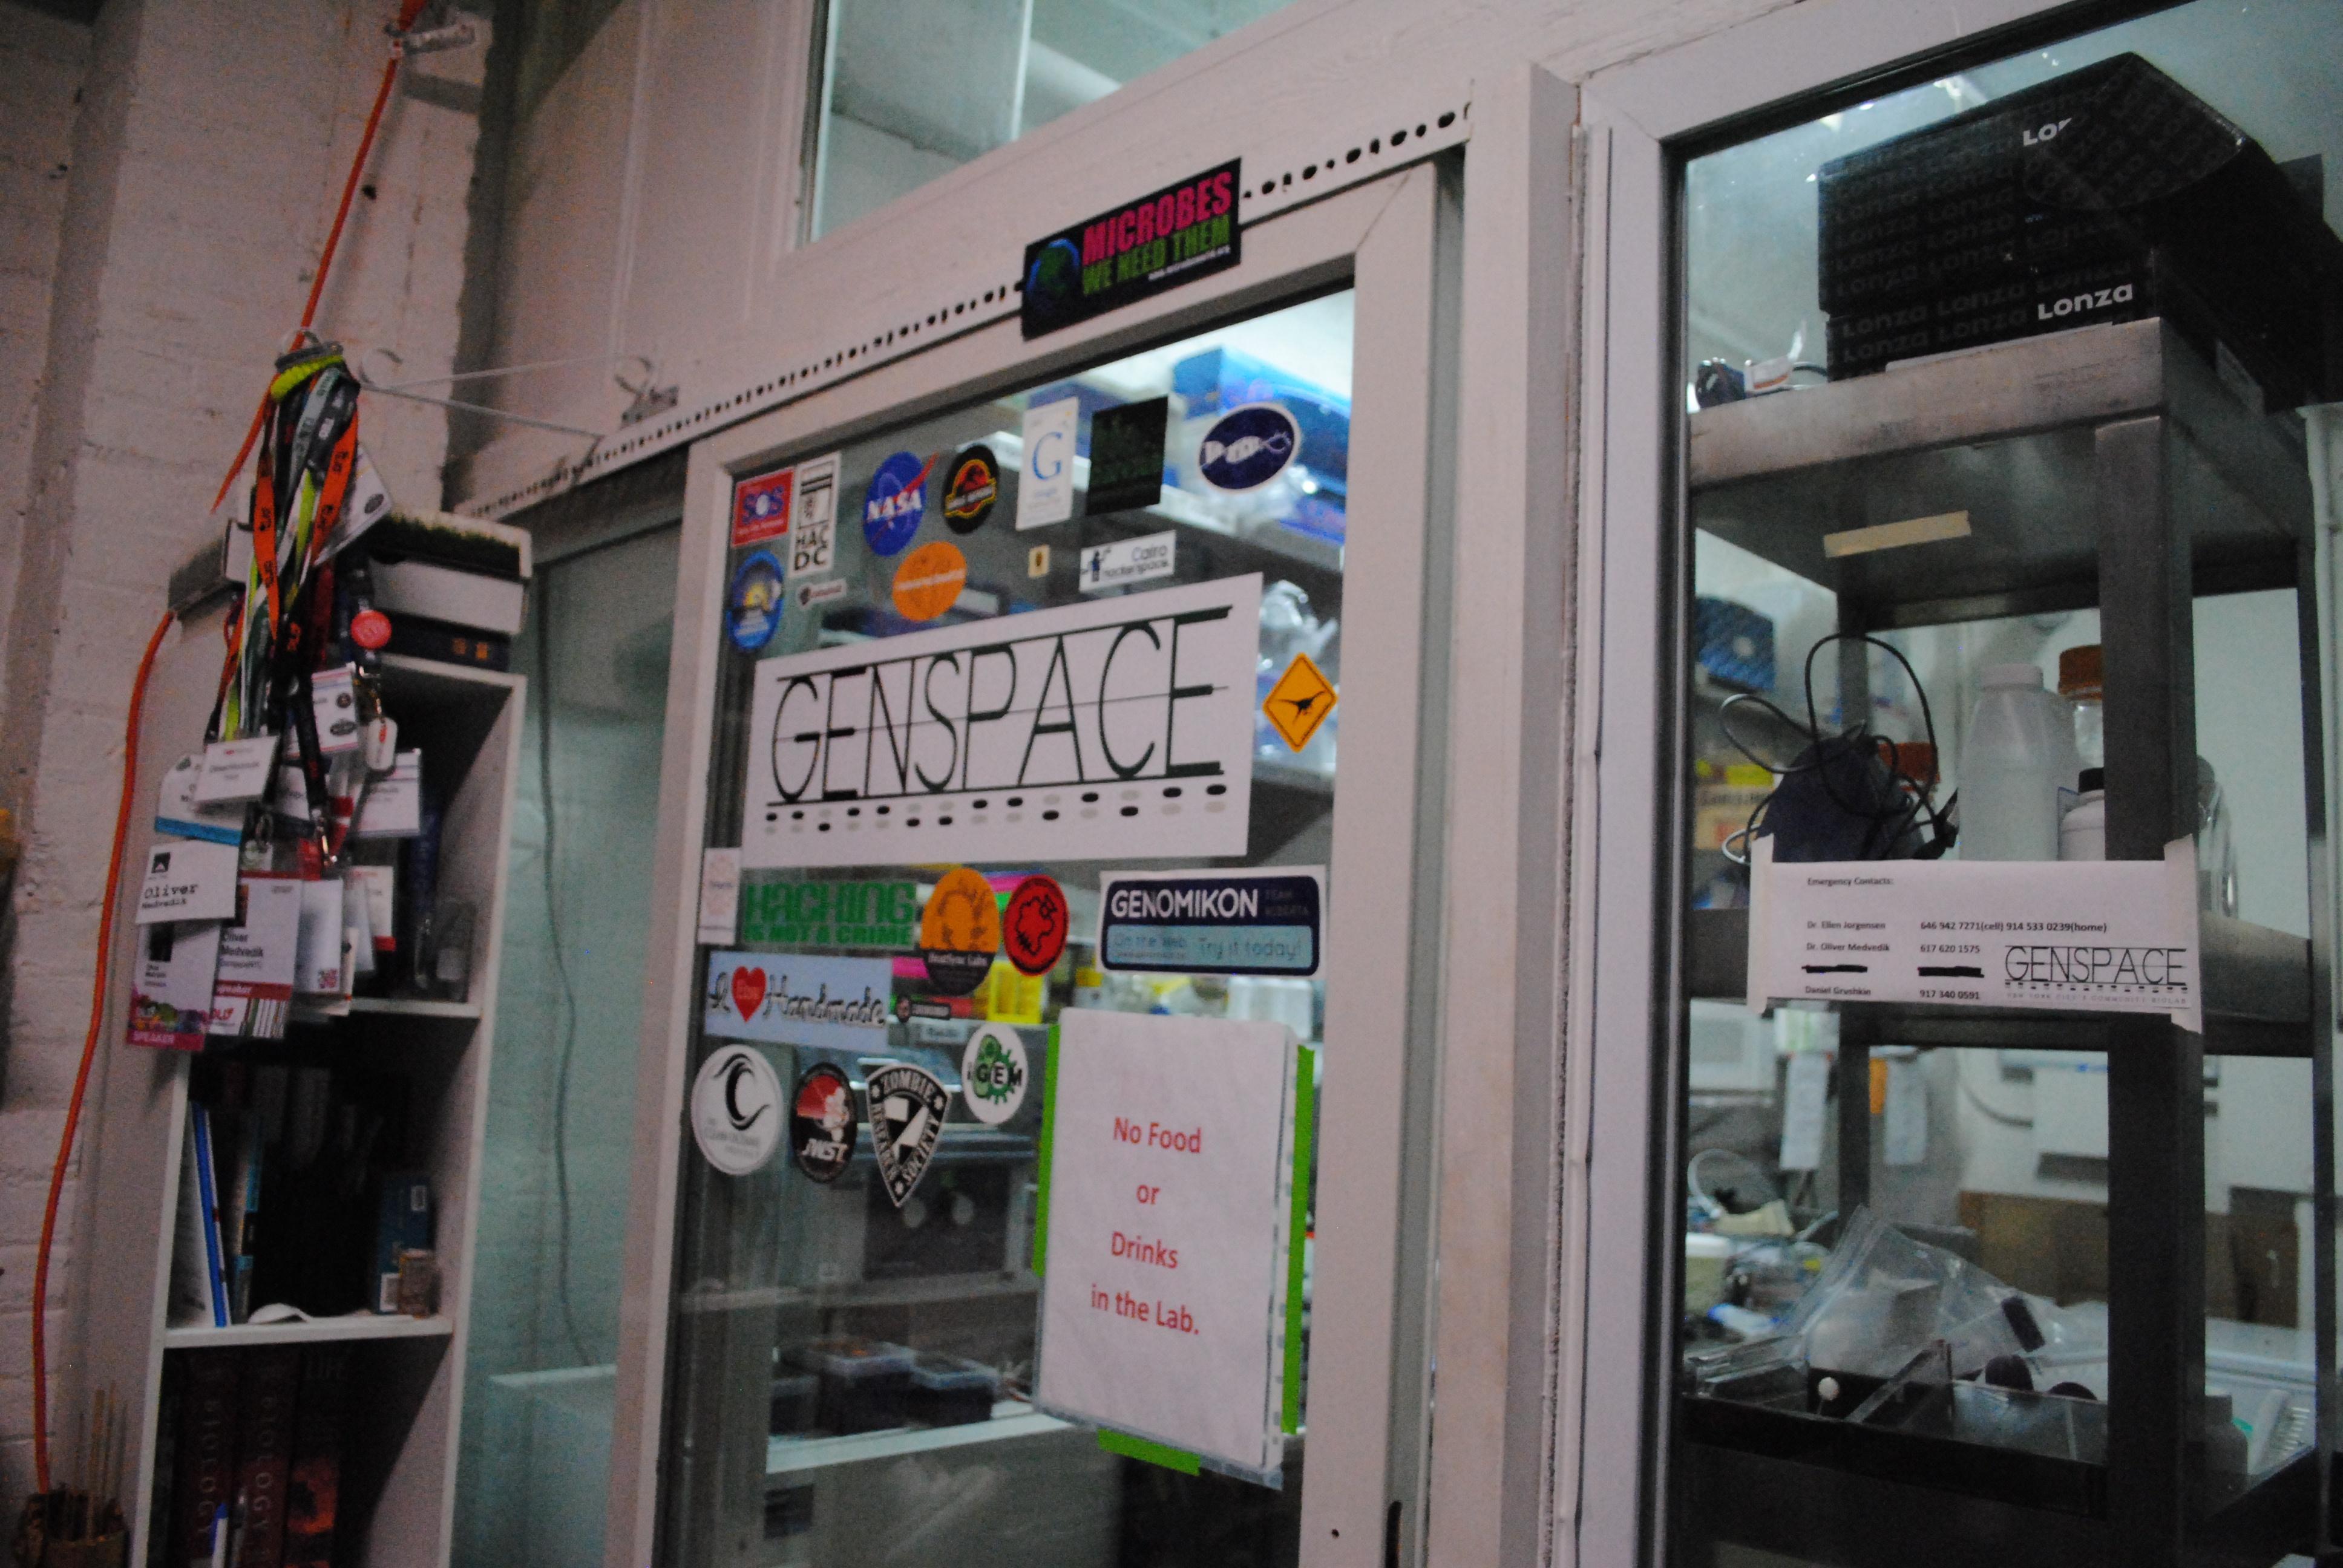 Lab entrace to GenSpace for DIY biohackers in New York. The entrance has glass windows covered with stickers and a sign that restricts food and drinks. Behind the entrance lies lab equipment,